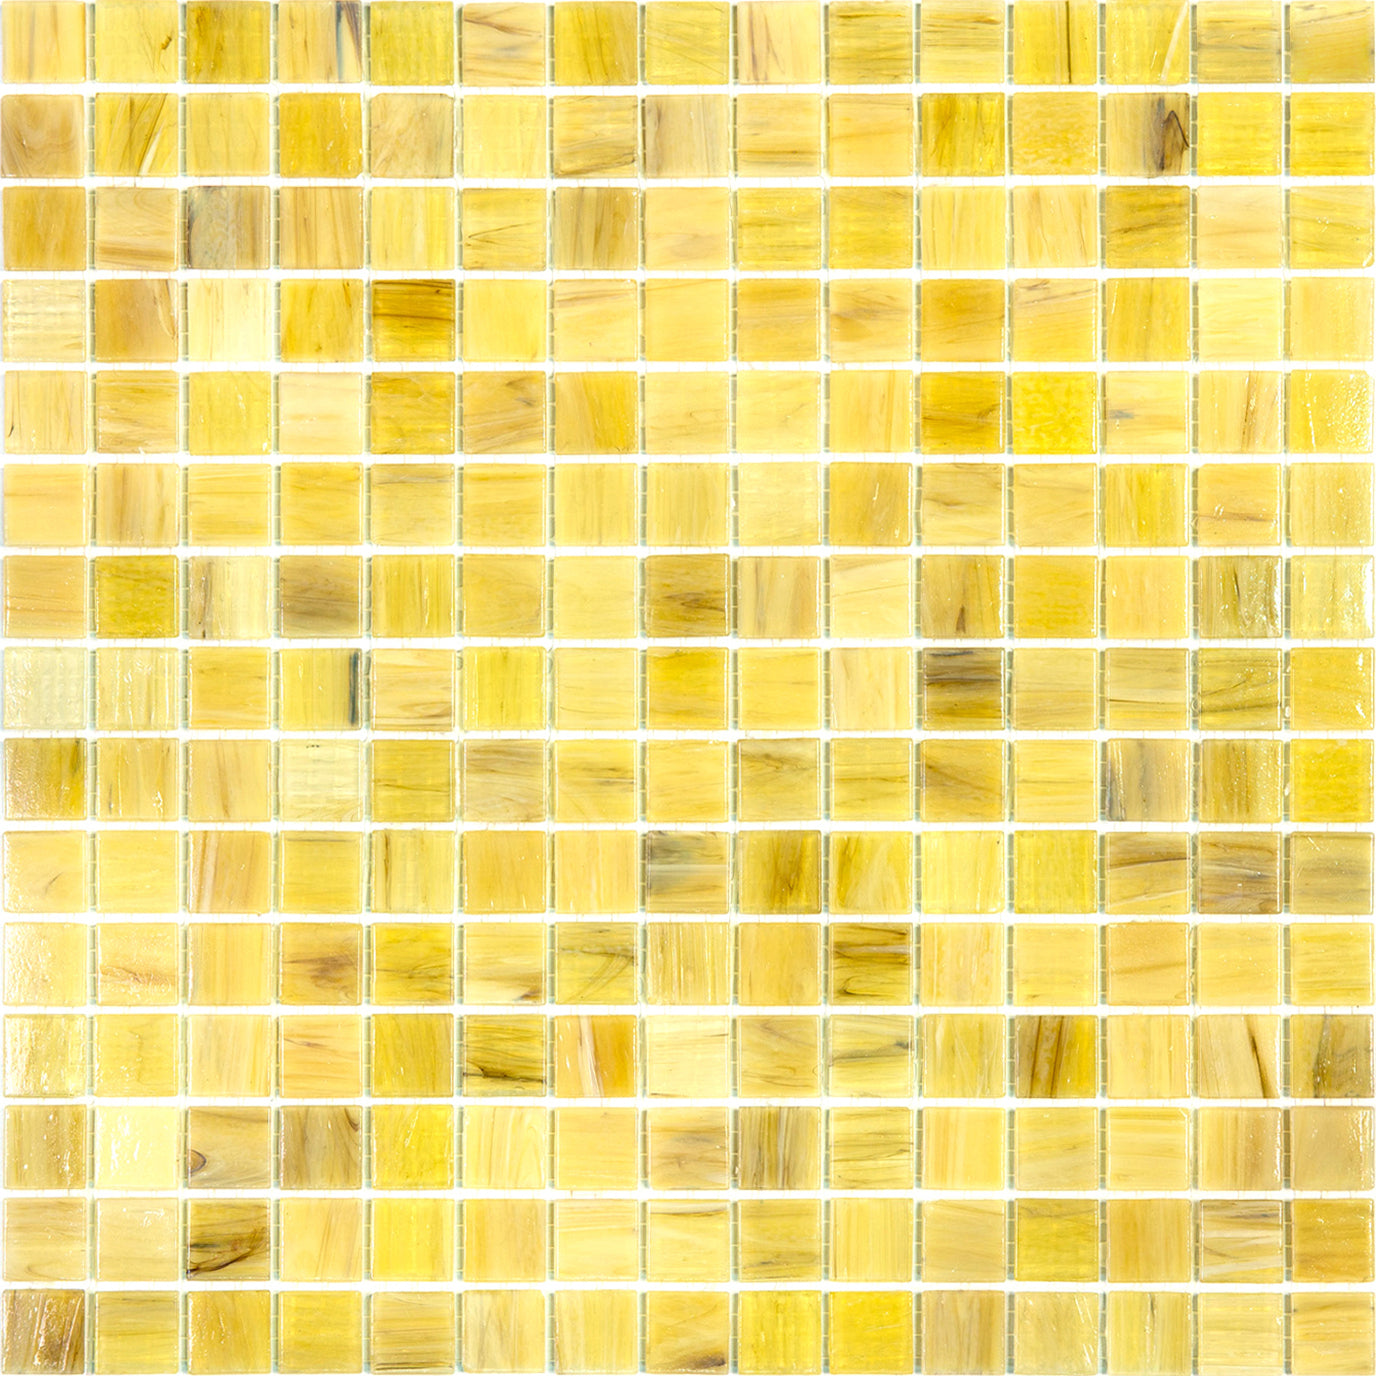 mir alma solid colors 0_8 inch stella stn620 wall and floor mosaic distributed by surface group natural materials